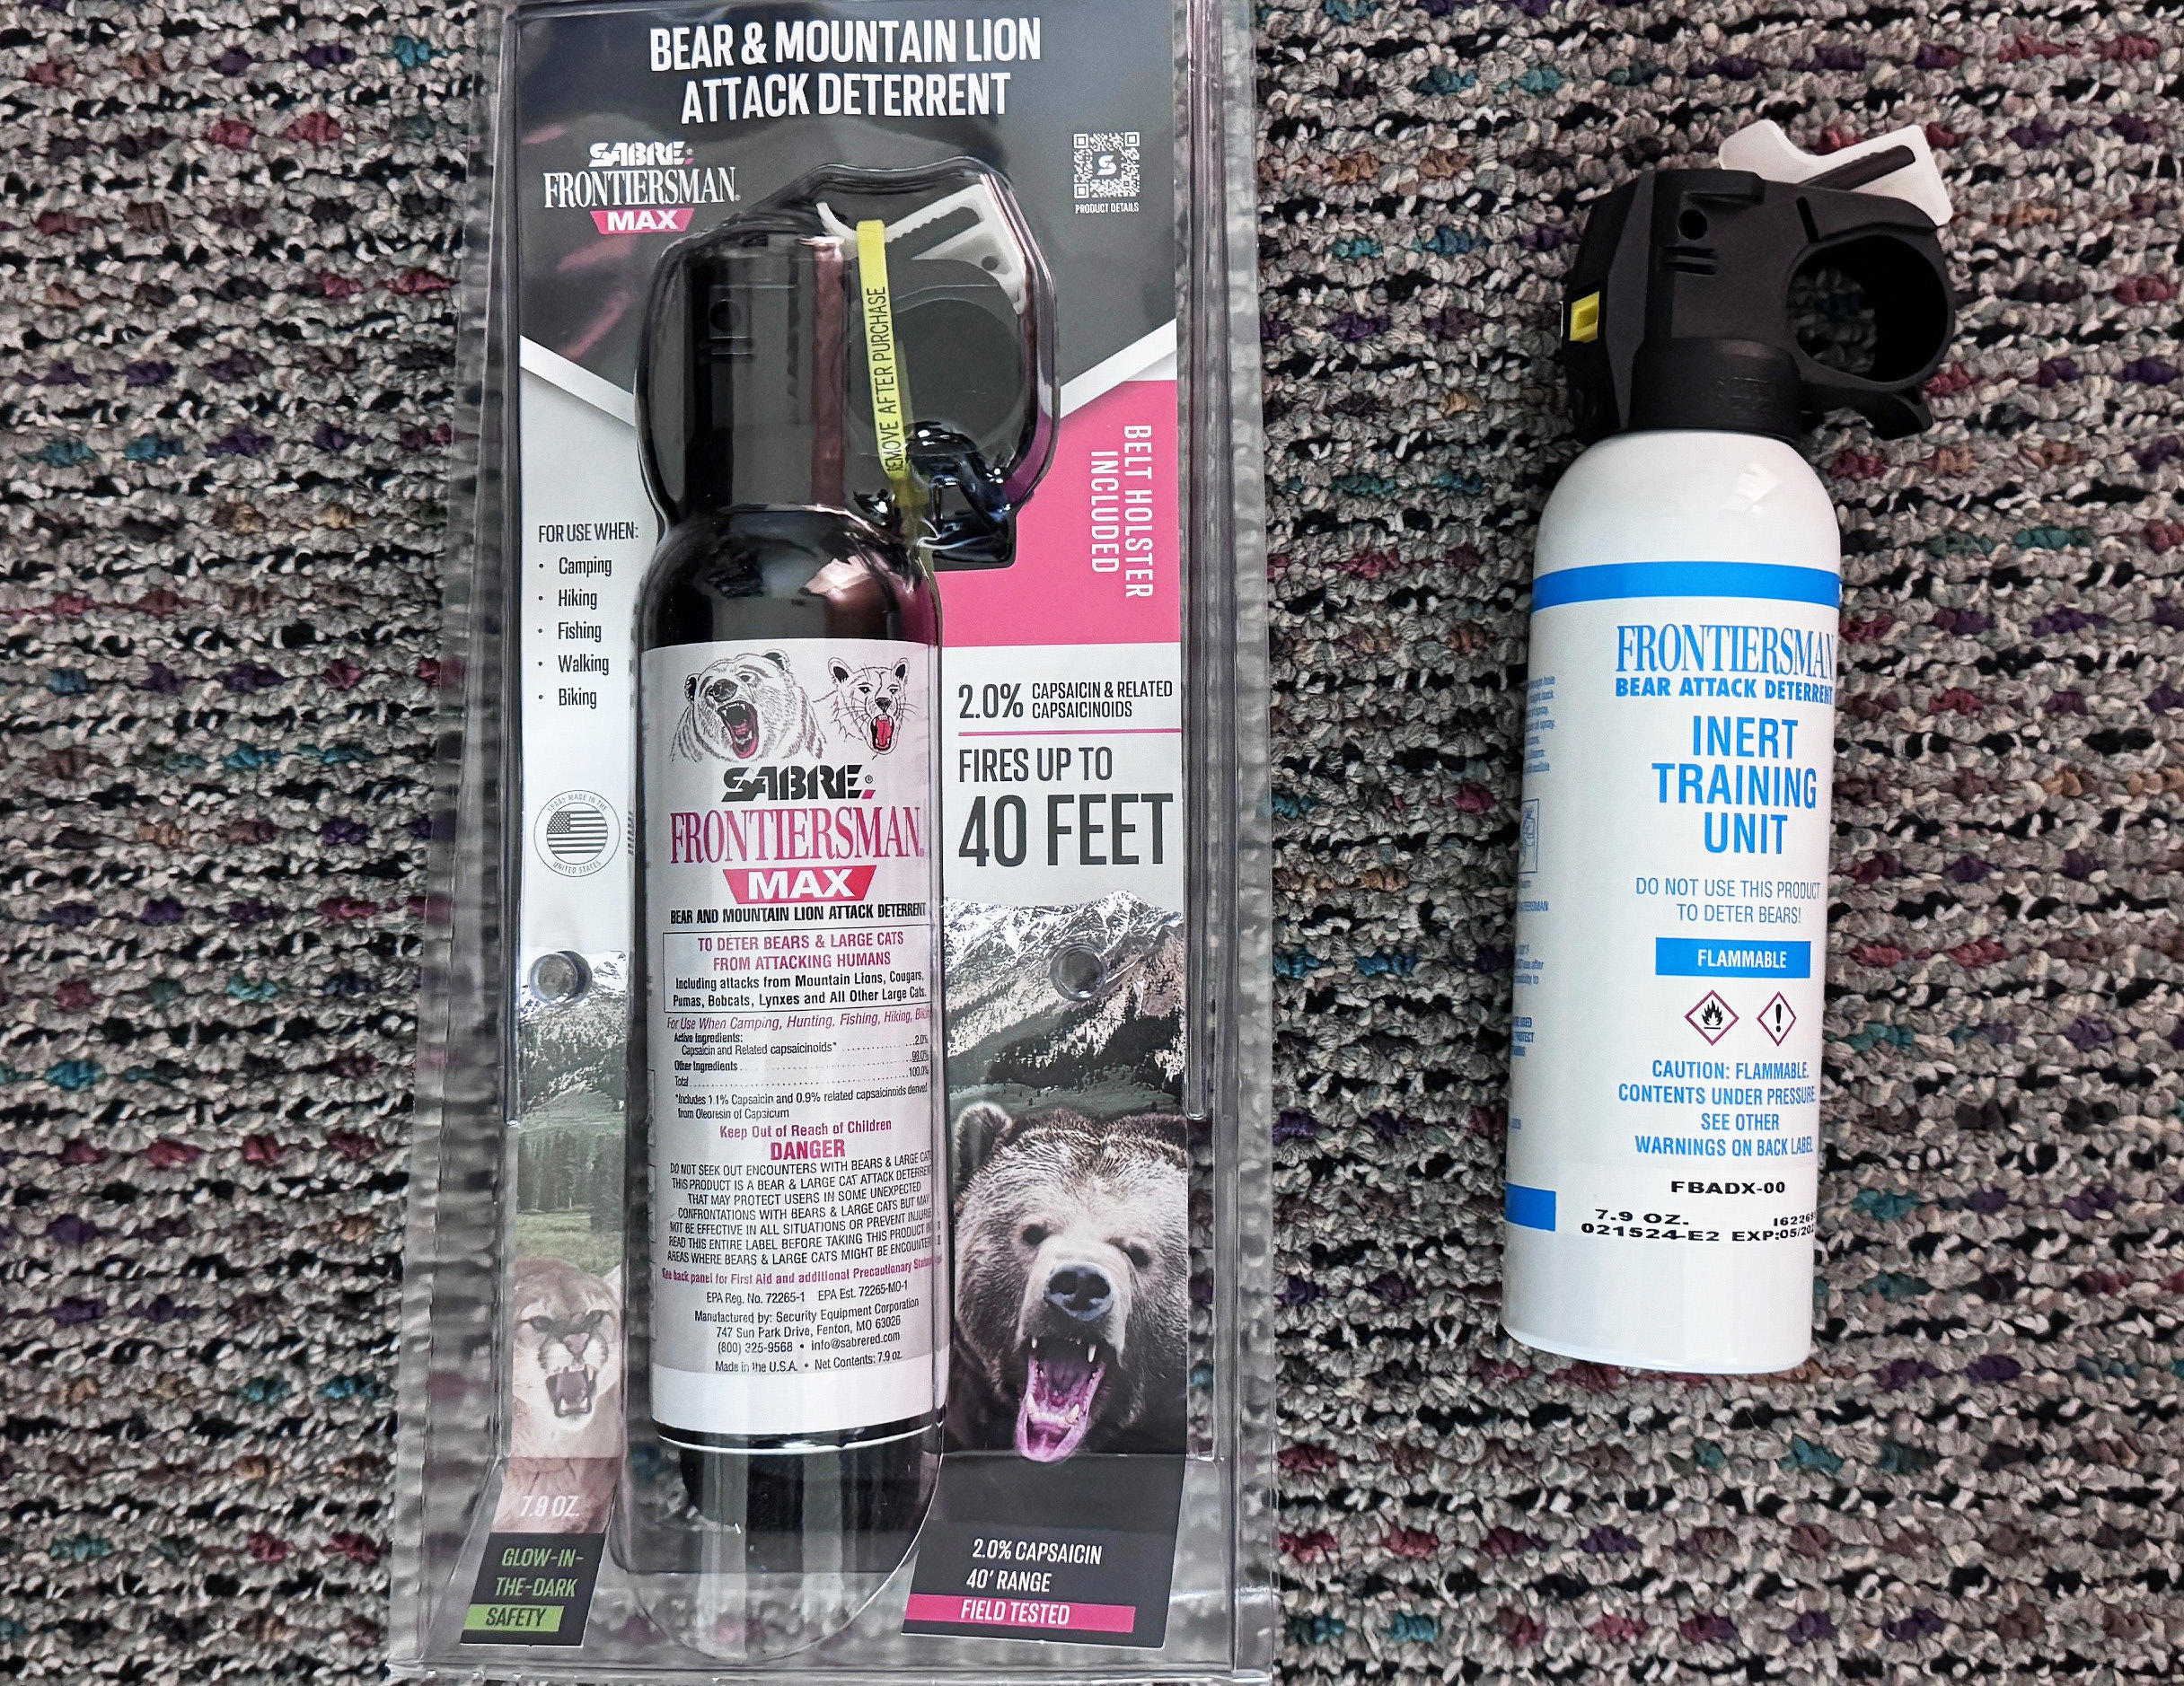 Cannisters of bear spray and inert training spray